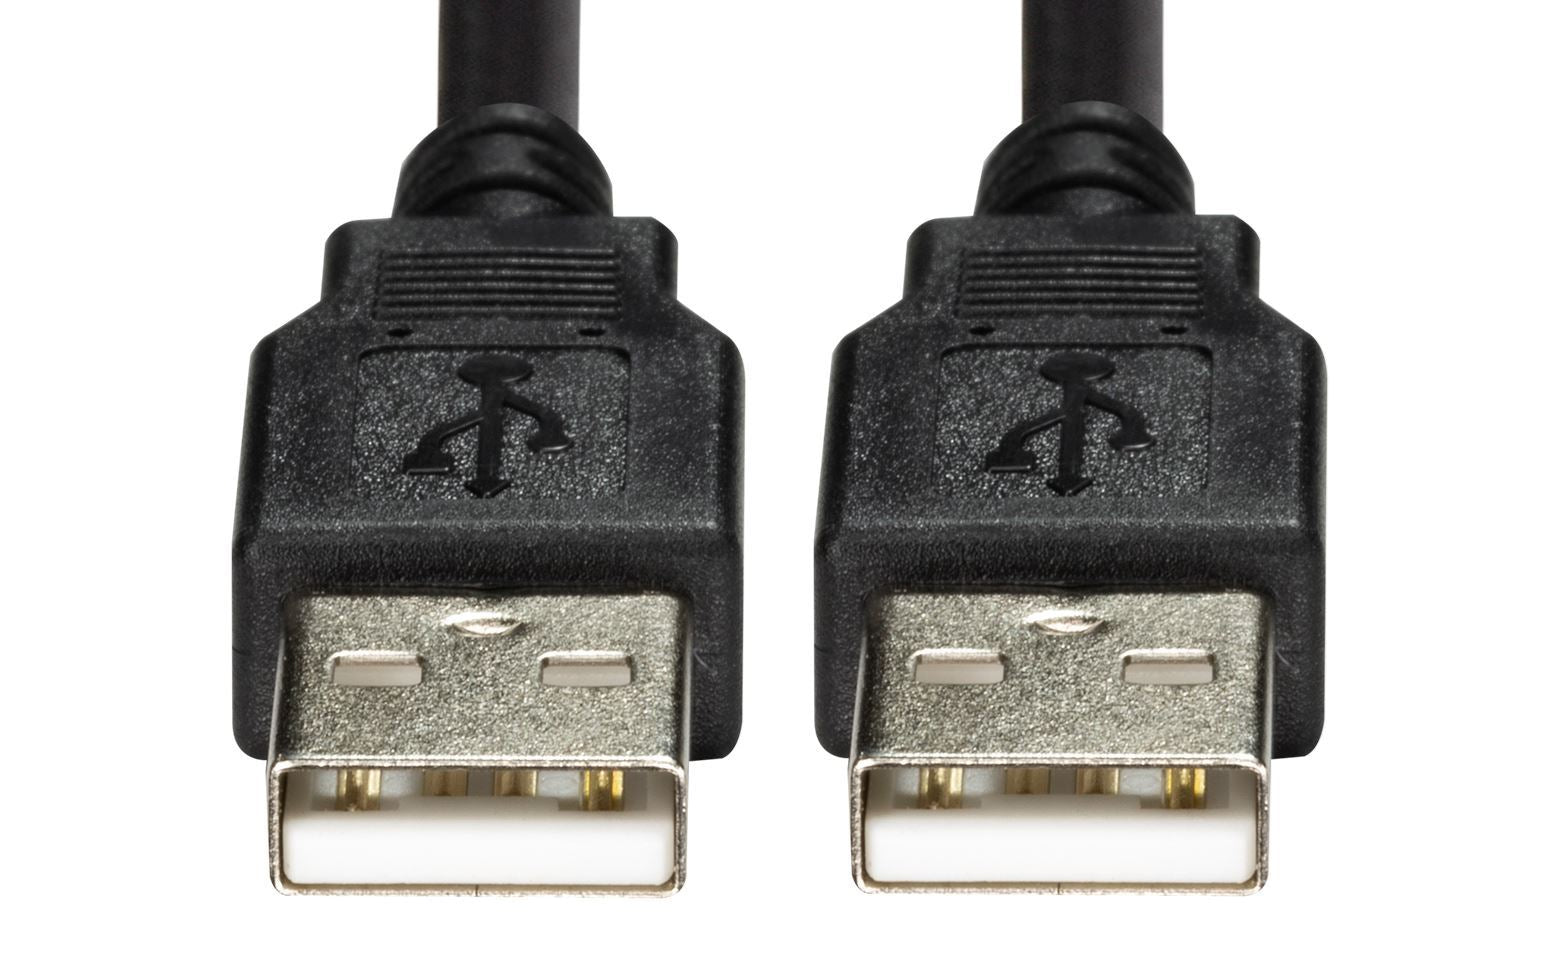 DYNAMIX_1m_USB_2.0_USB-A_Male_to_USB-A_Male_Cable 1055